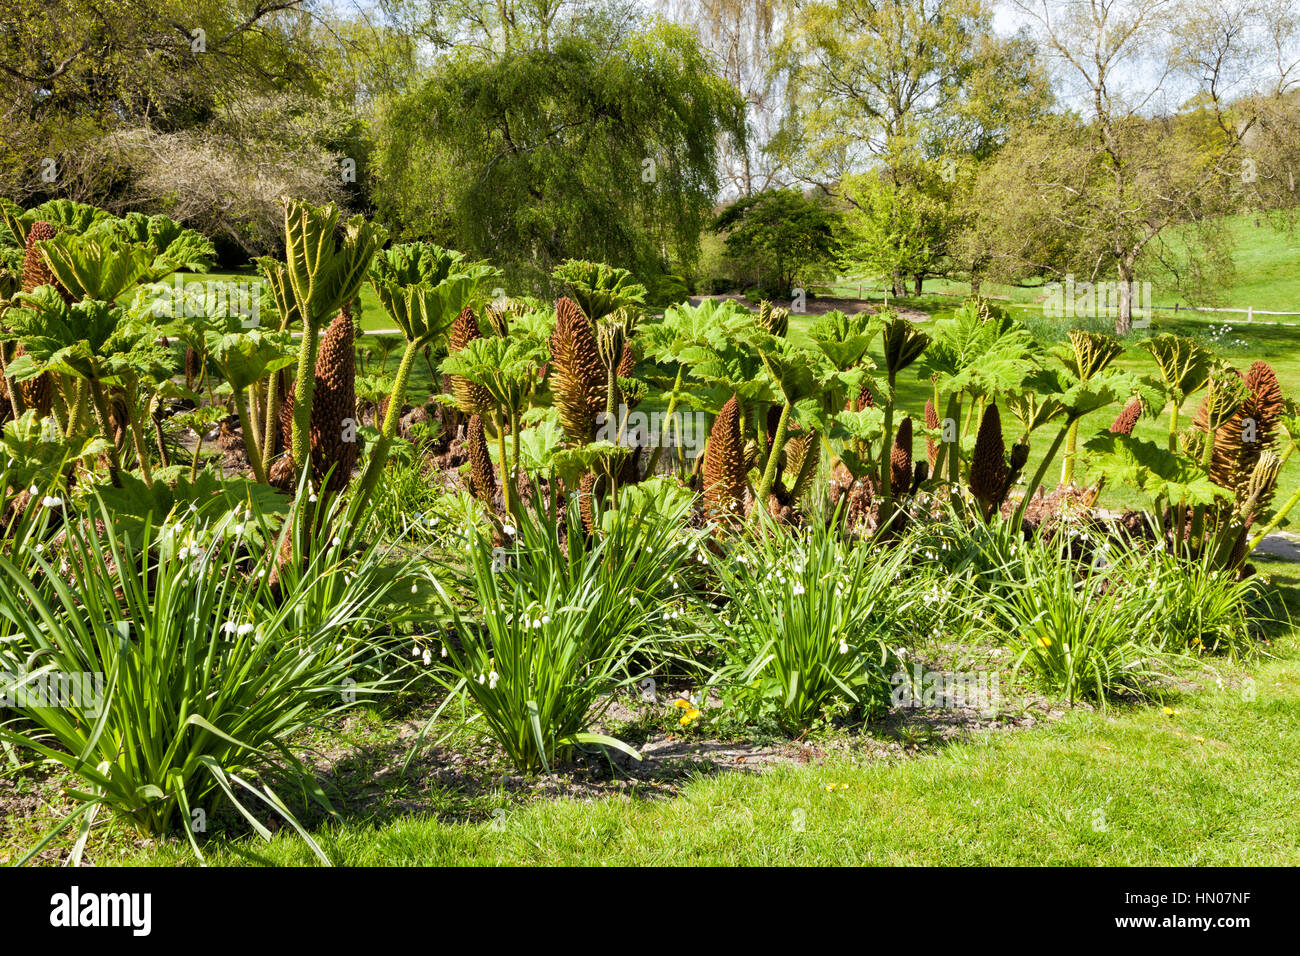 Parkland of trees covered with spring fresh leaves, architectural plants of giant rhubarb with brown flower spikes Stock Photo